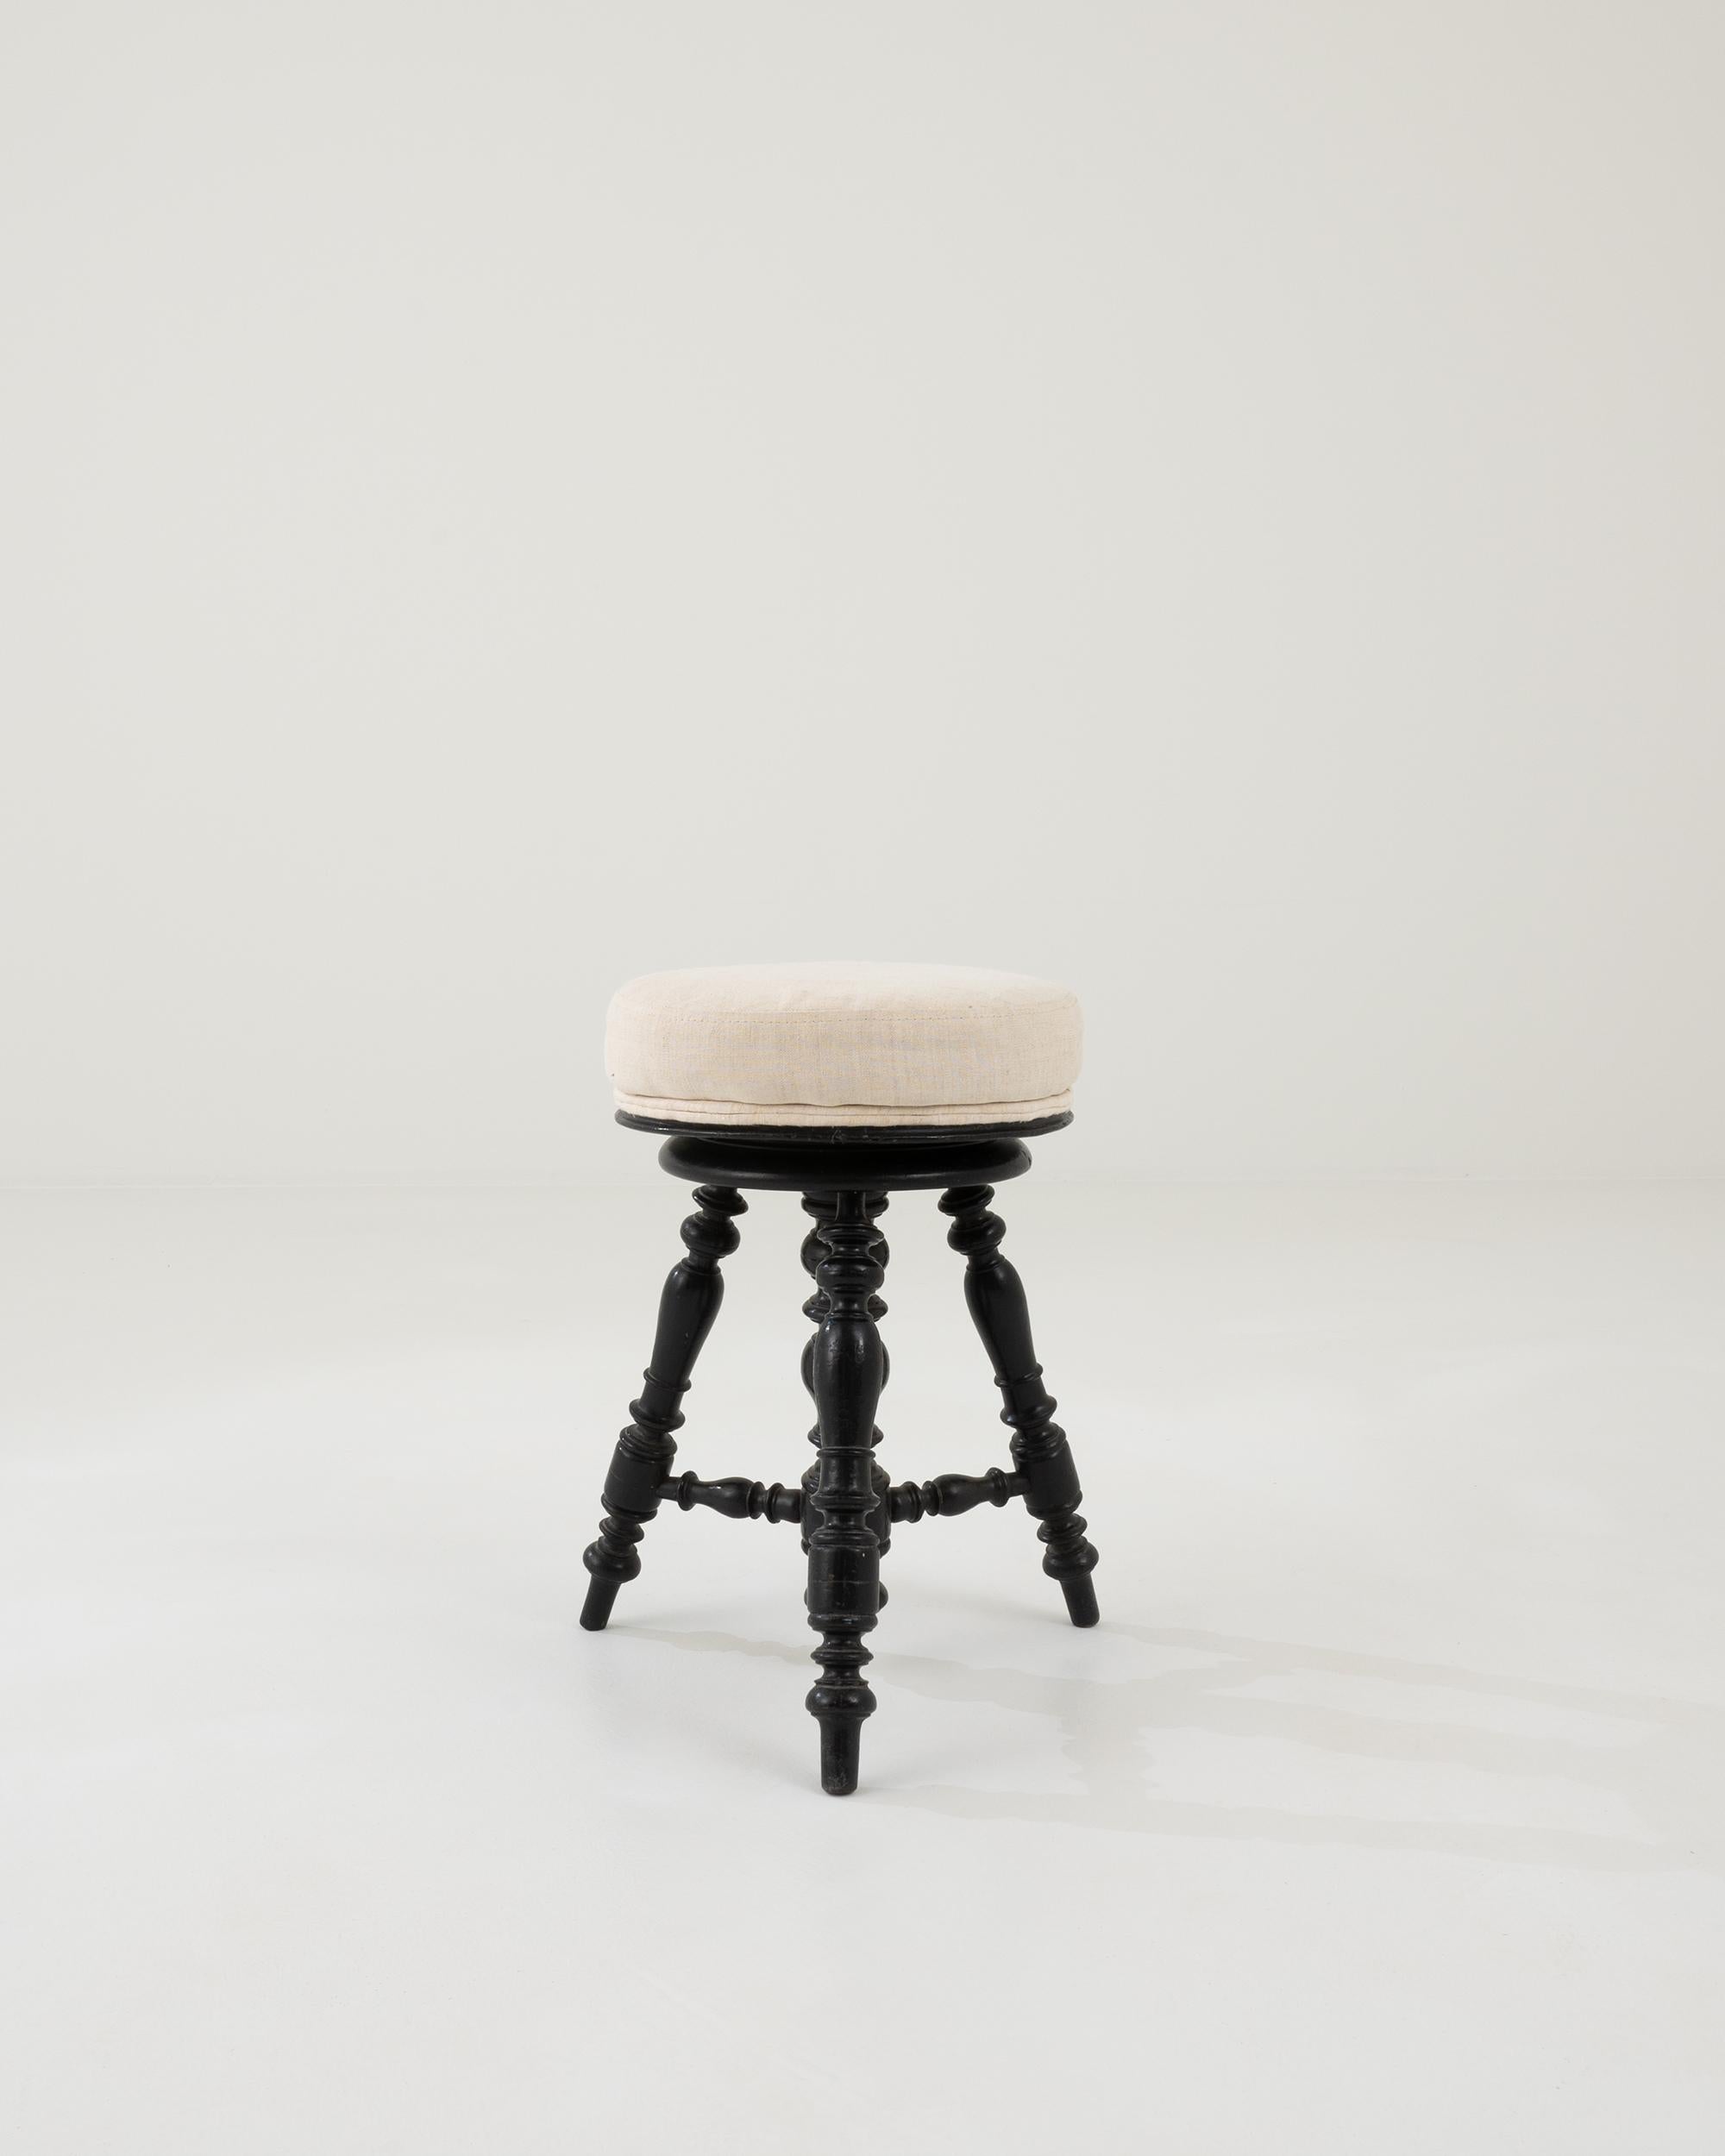 A minimal and decorative French design from circa 1900. Wooden turned legs support a round upholstered seat, rotating up and down with a spinning mechanism hidden inside a central column. Dramatic and reserved black with a great vintage patina,